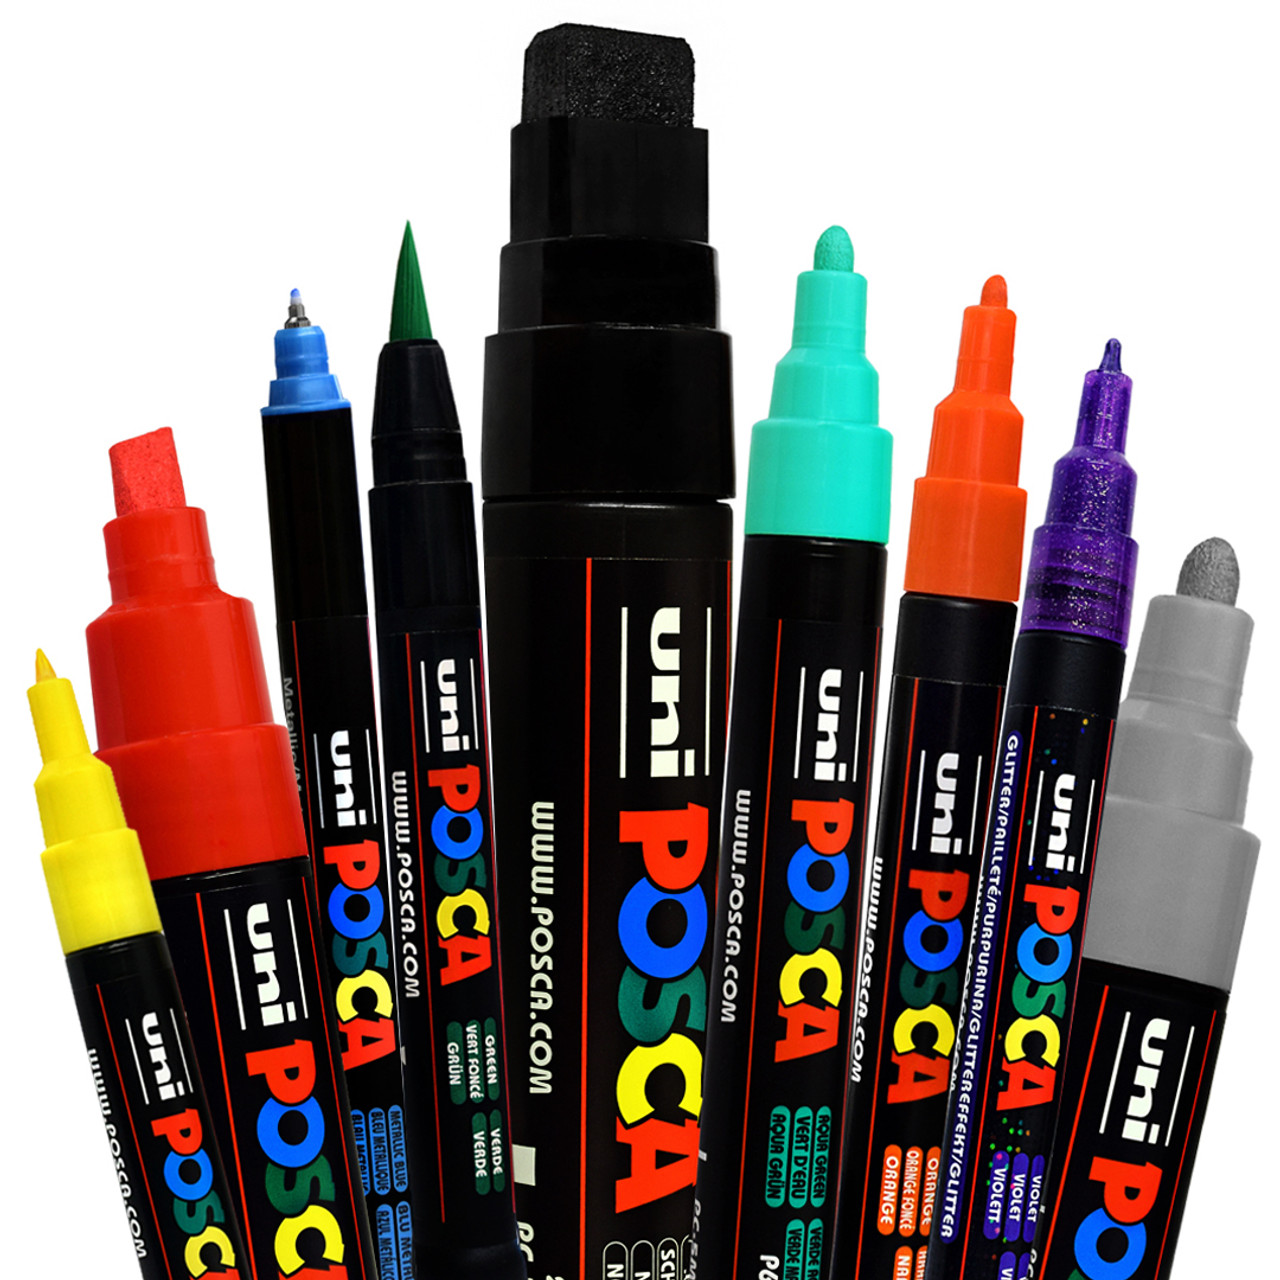 Posca Paint Markers .7mm